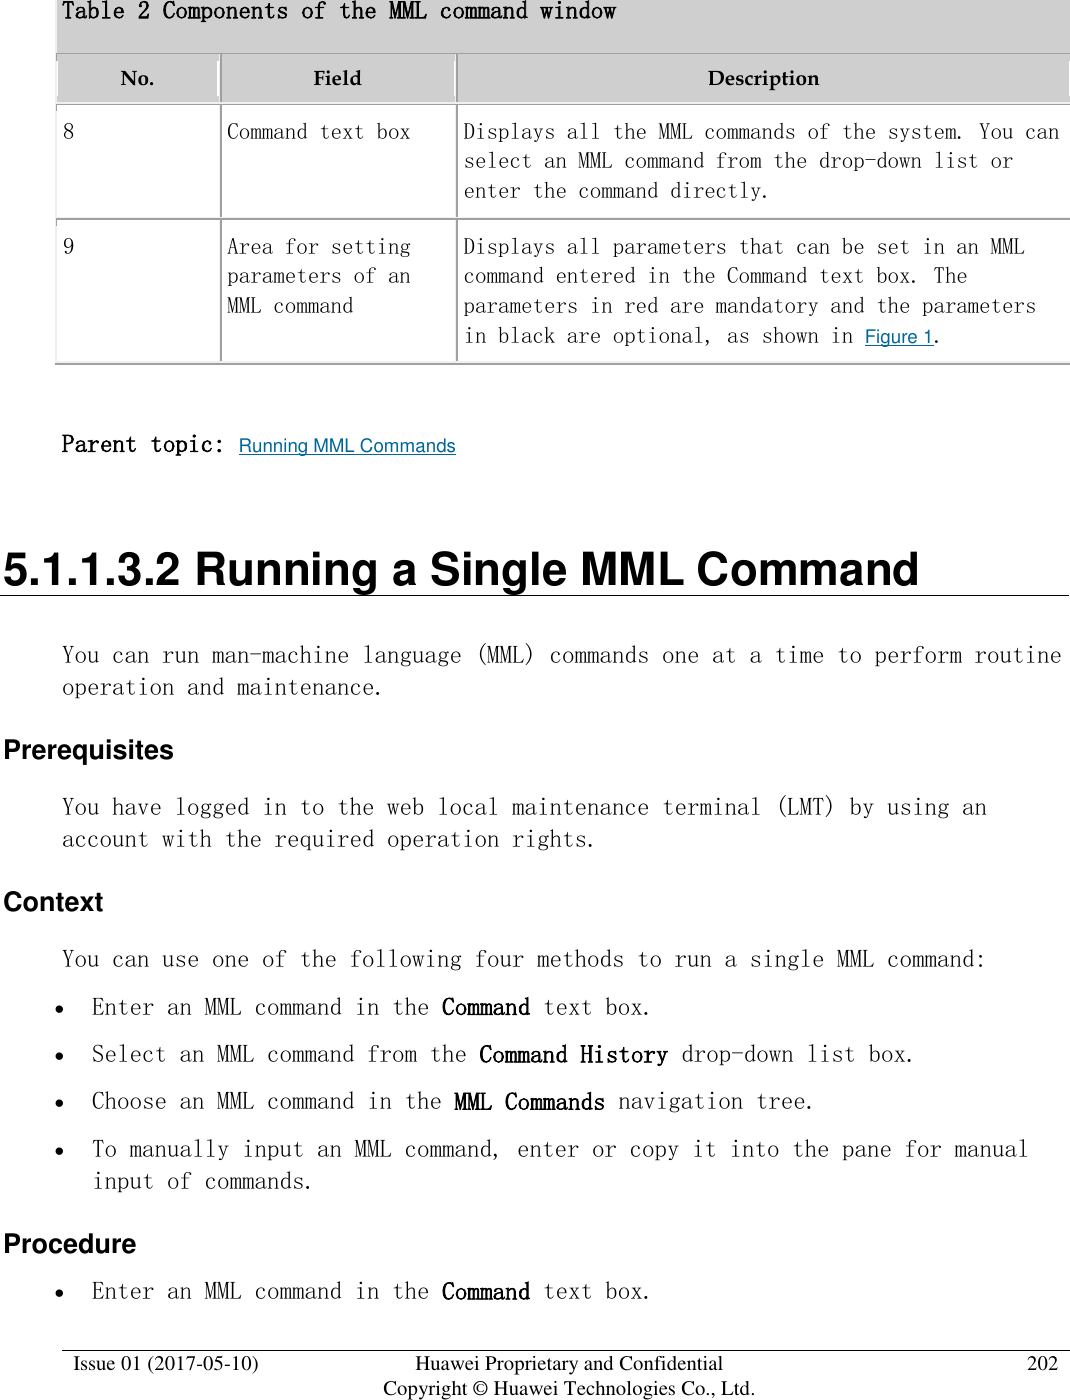  Issue 01 (2017-05-10) Huawei Proprietary and Confidential      Copyright © Huawei Technologies Co., Ltd. 202  Table 2 Components of the MML command window No. Field Description 8 Command text box Displays all the MML commands of the system. You can select an MML command from the drop-down list or enter the command directly.  9 Area for setting parameters of an MML command Displays all parameters that can be set in an MML command entered in the Command text box. The parameters in red are mandatory and the parameters in black are optional, as shown in Figure 1.  Parent topic: Running MML Commands 5.1.1.3.2 Running a Single MML Command You can run man-machine language (MML) commands one at a time to perform routine operation and maintenance.  Prerequisites You have logged in to the web local maintenance terminal (LMT) by using an account with the required operation rights.  Context You can use one of the following four methods to run a single MML command:   Enter an MML command in the Command text box.  Select an MML command from the Command History drop-down list box.  Choose an MML command in the MML Commands navigation tree.  To manually input an MML command, enter or copy it into the pane for manual input of commands. Procedure  Enter an MML command in the Command text box.  